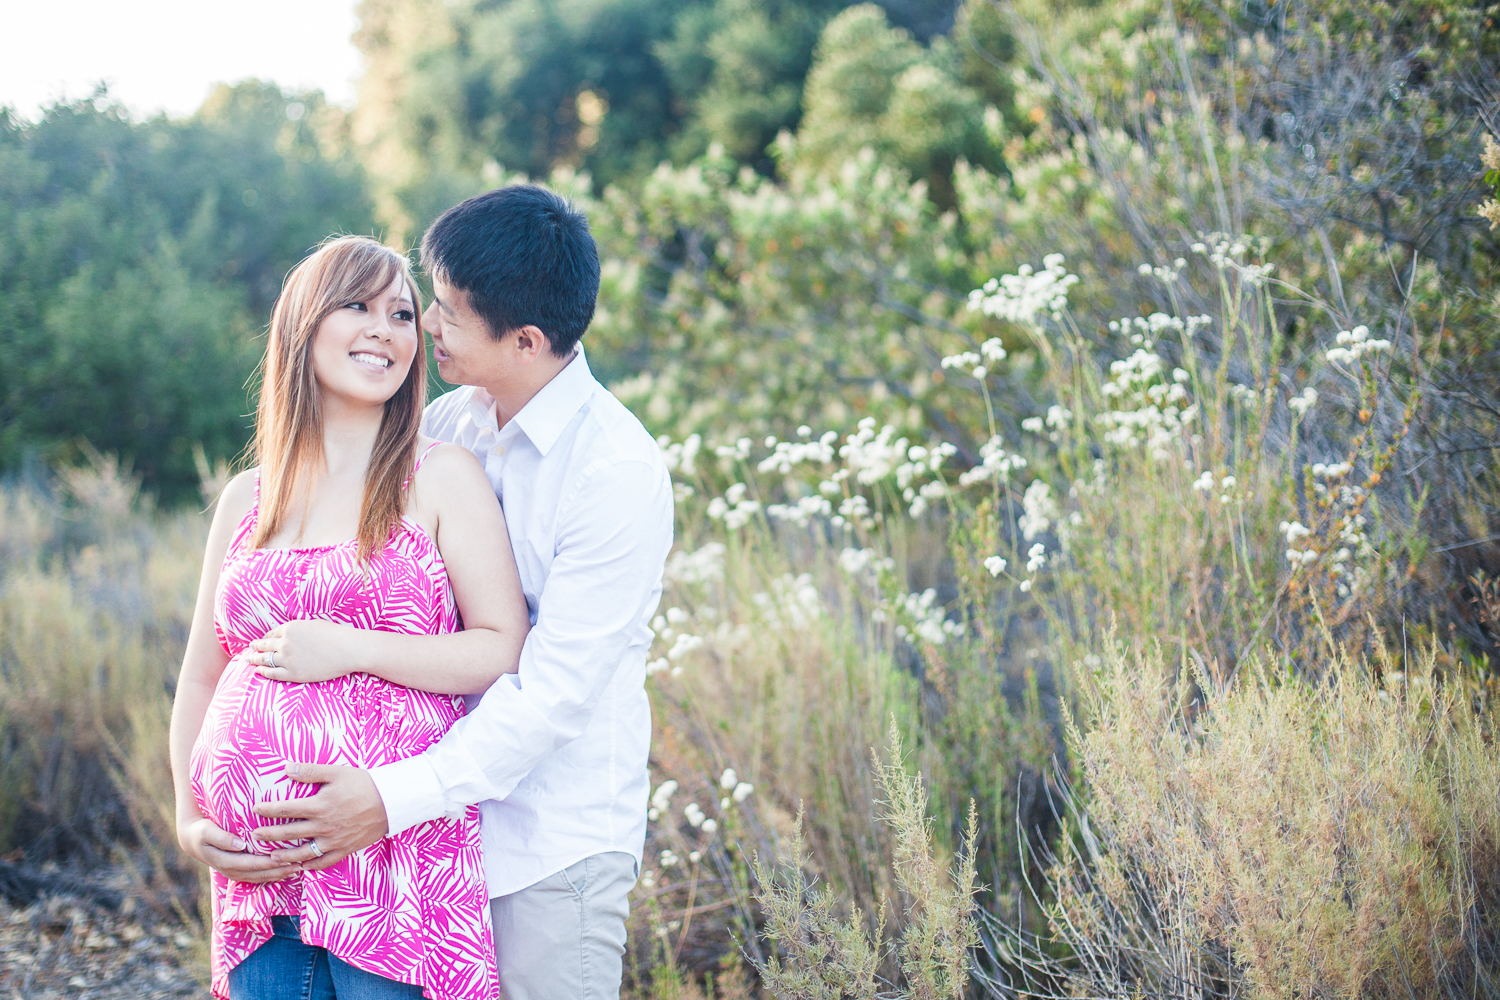 Eve & Frankie’s Maternity Session | Oak Canyon Nature Center in Anaheim, CA